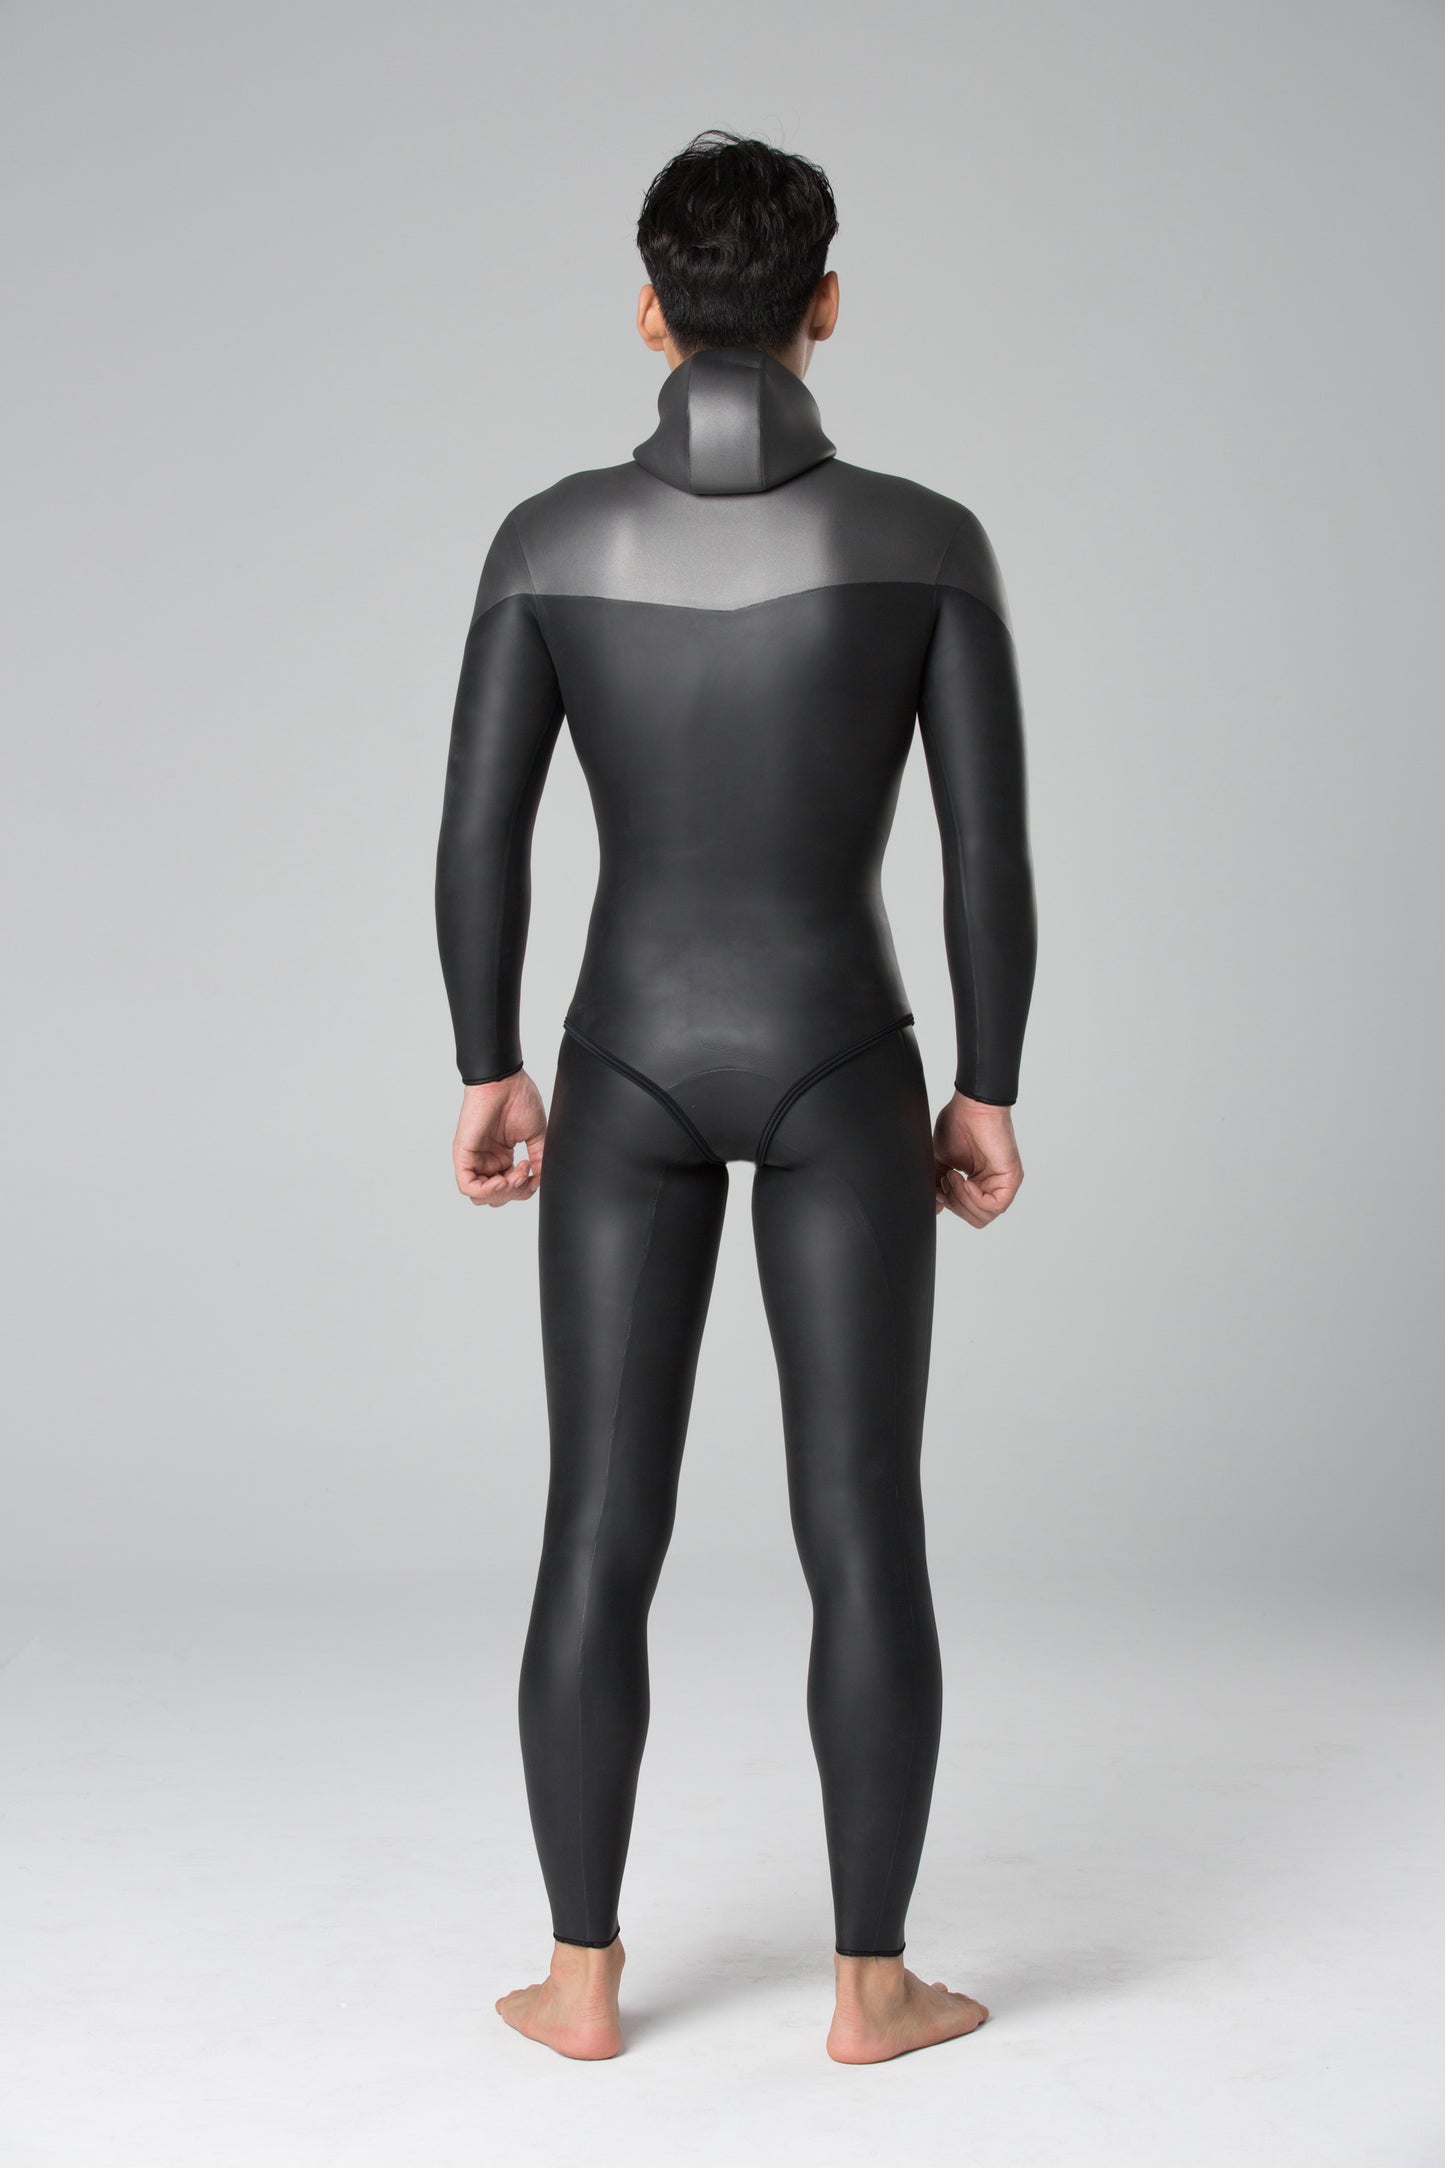 MoreHey Smooth-Skin Wetsuit